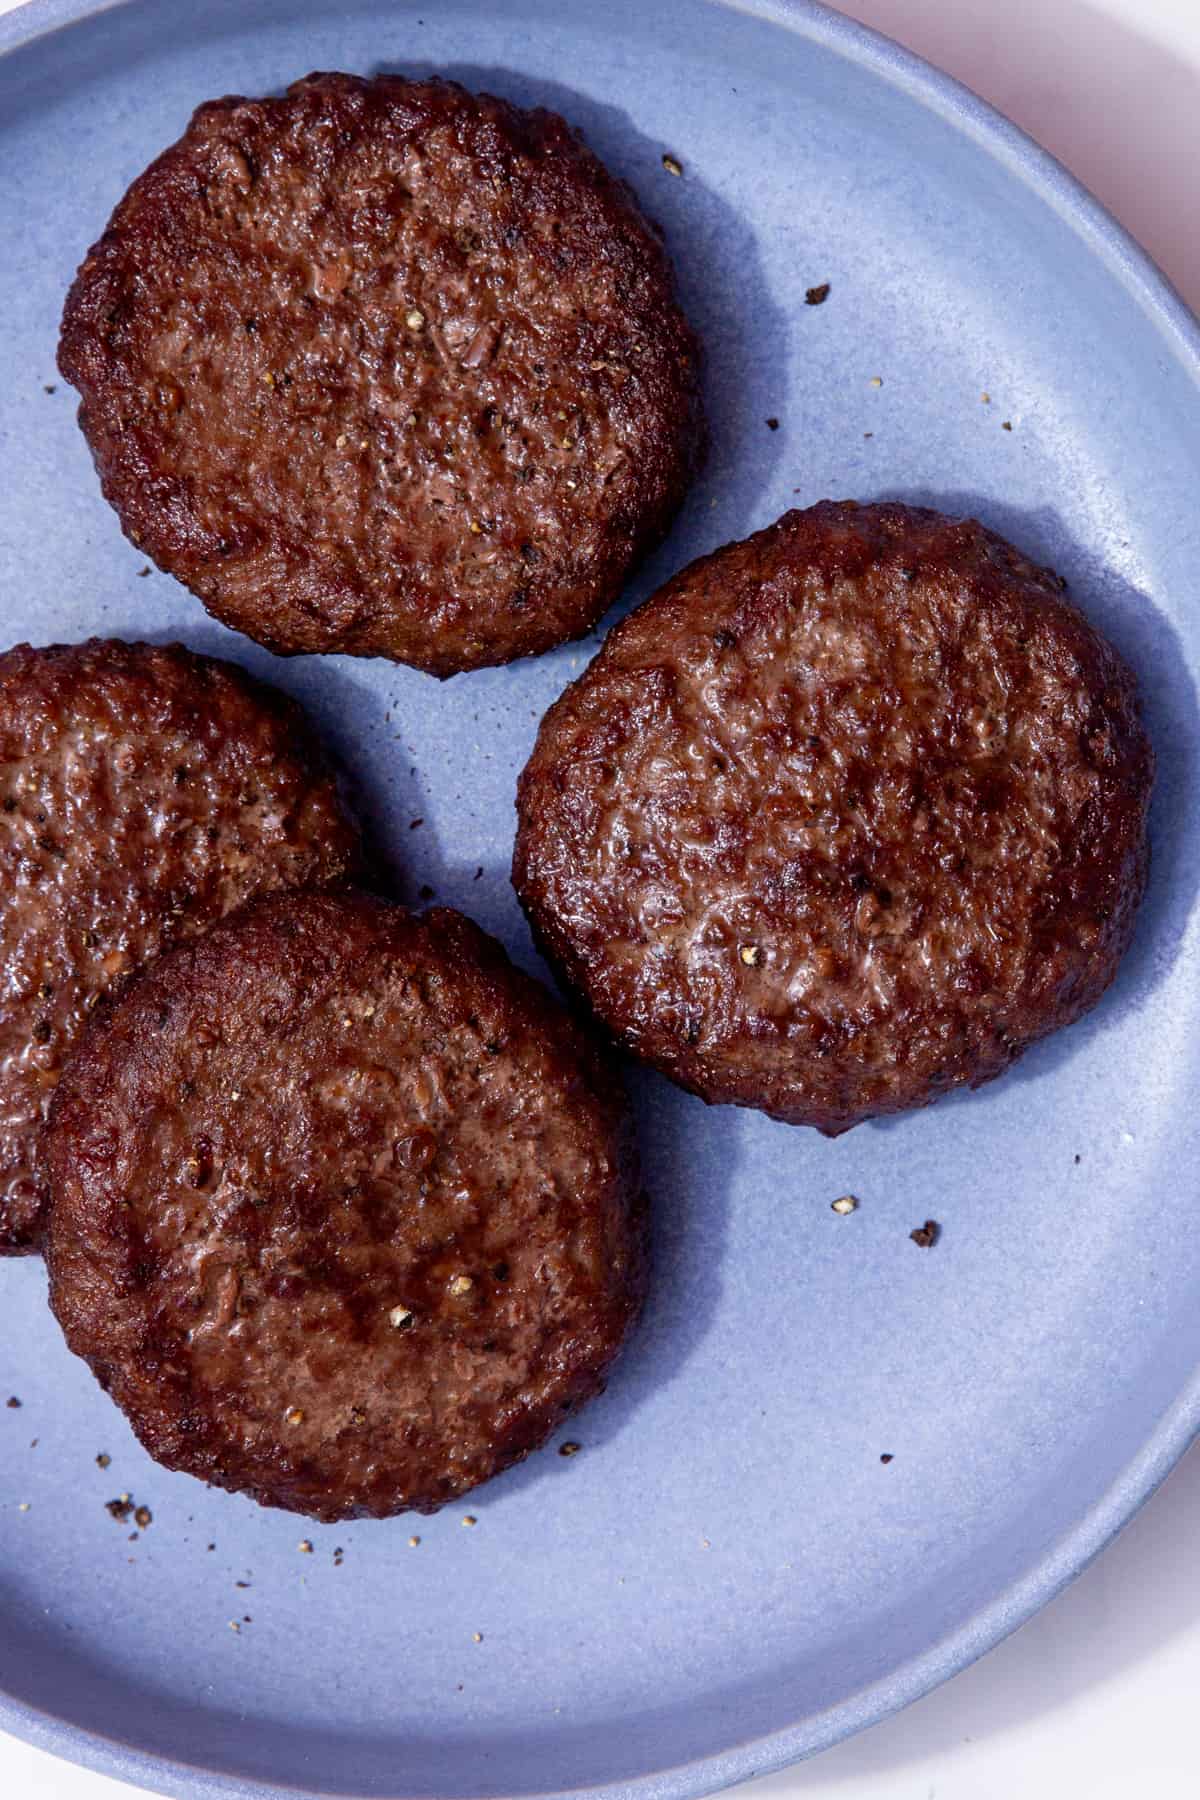 4 cooked, dark browned burgers on a blue plate with some pepper seasoning.